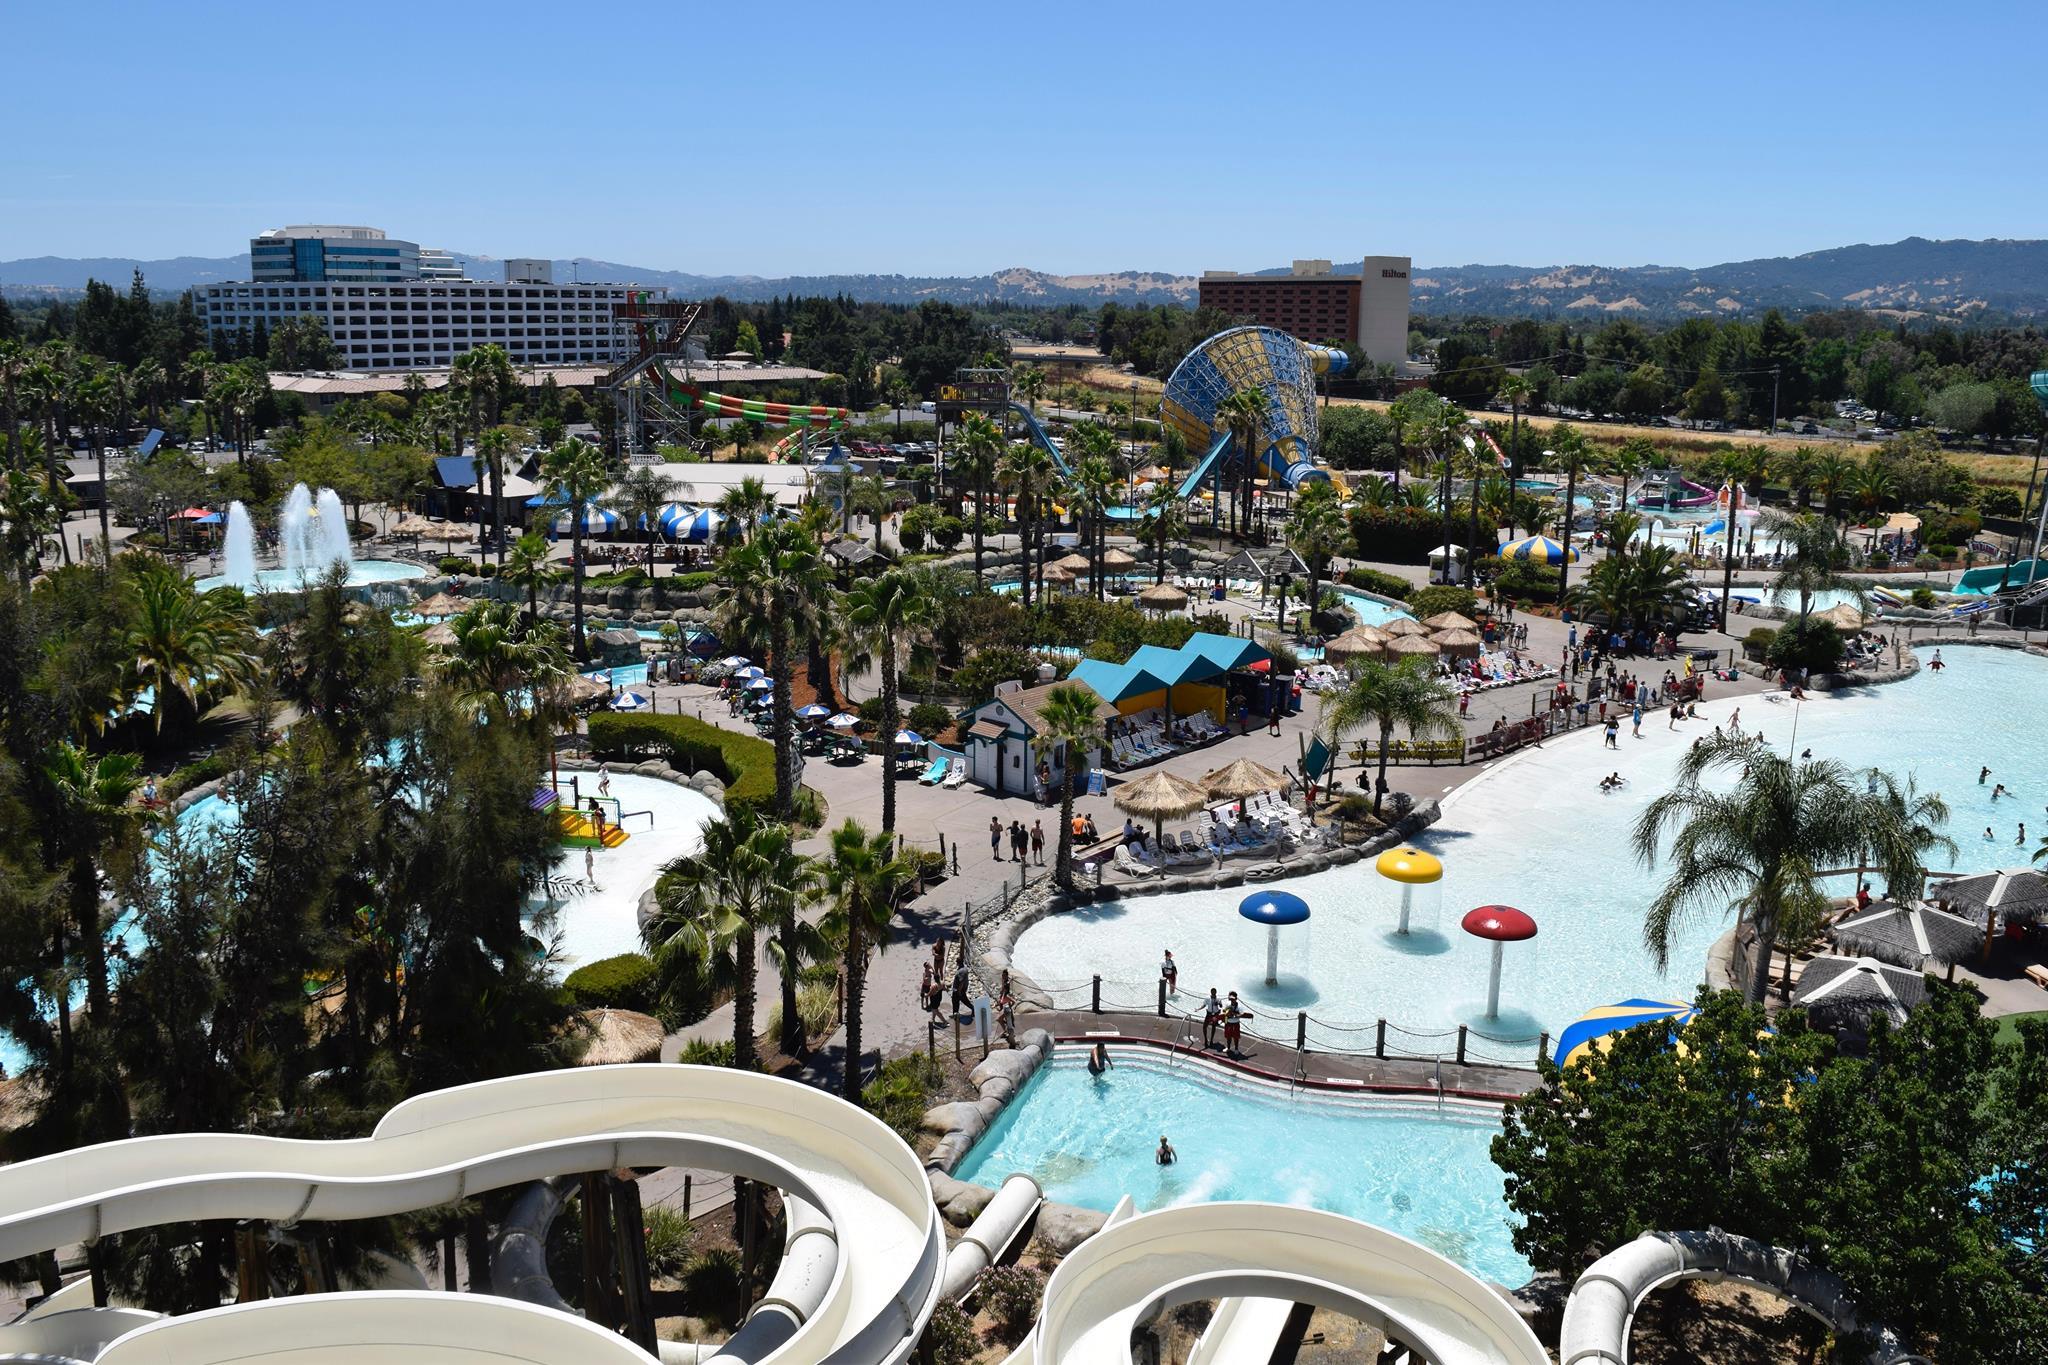 Waterworld California Becomes Six Flags' 20th Property | Business Wire